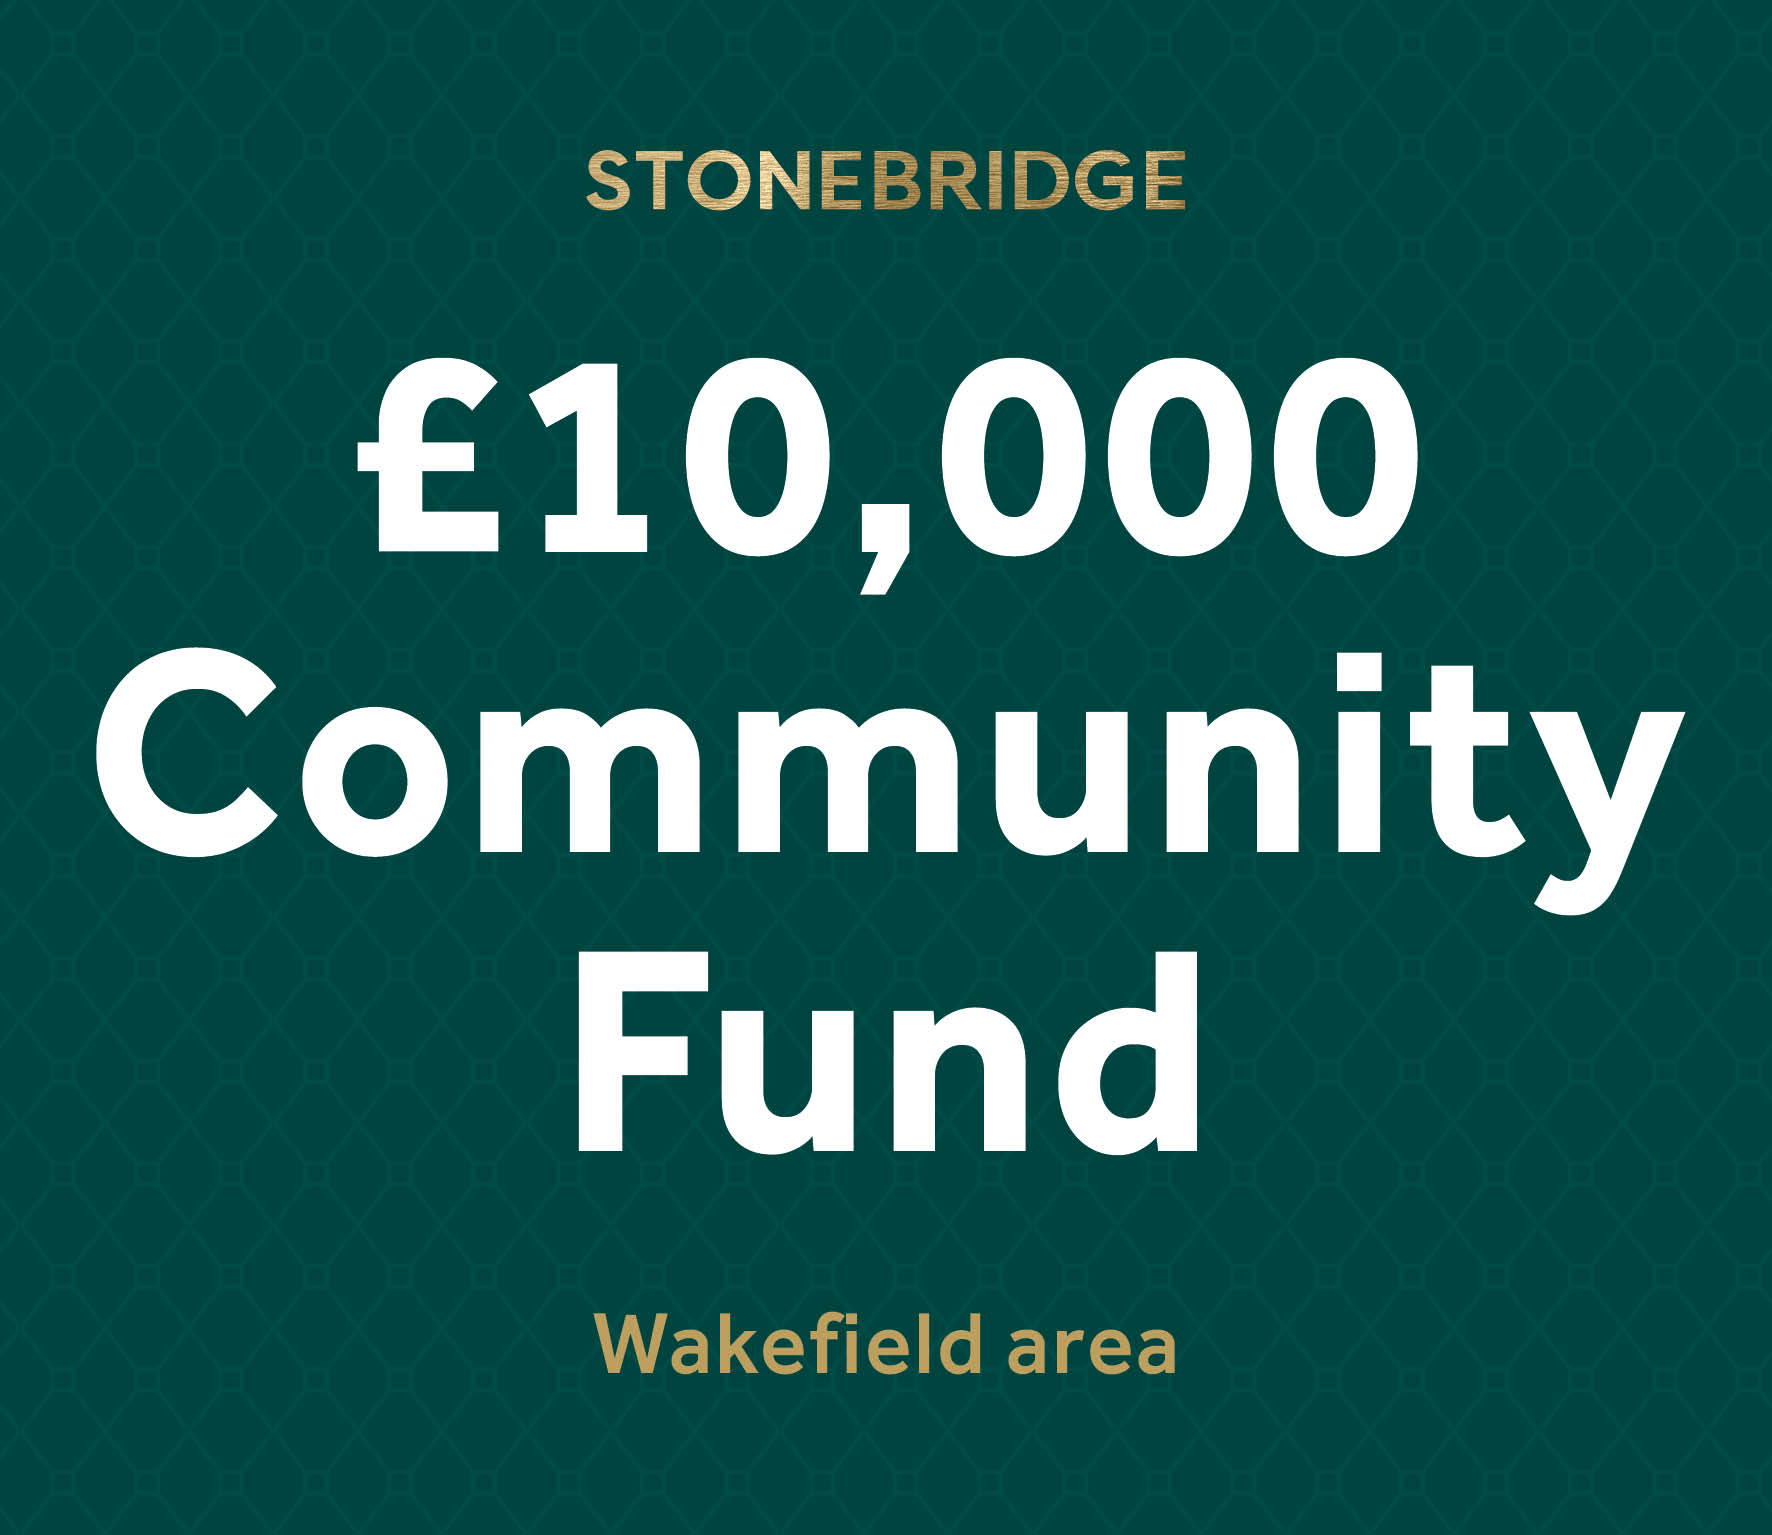 New homes and £10,000 Community fund launch at Wakefield